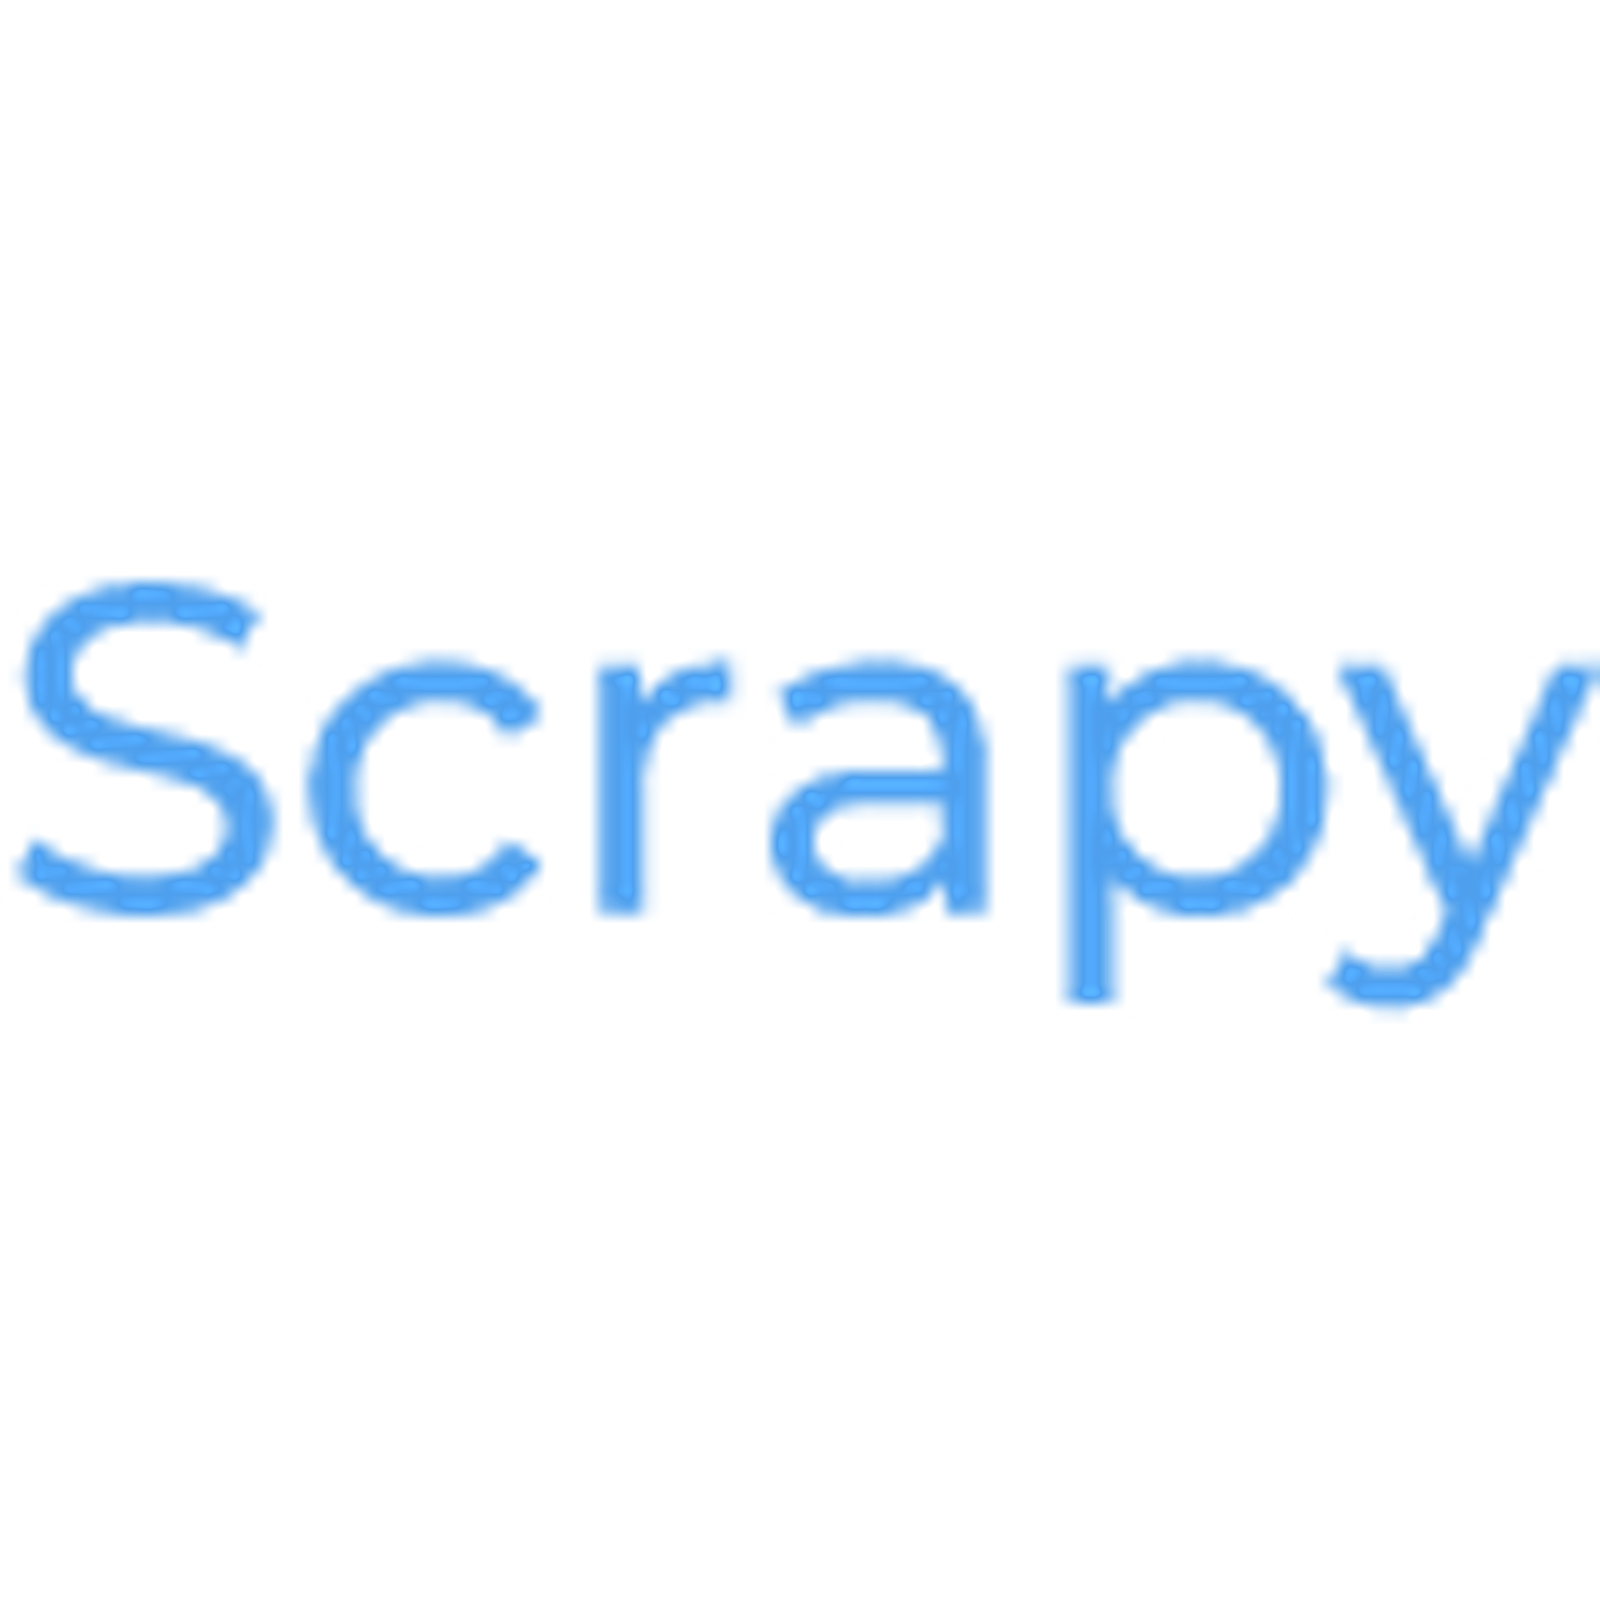 scrapy